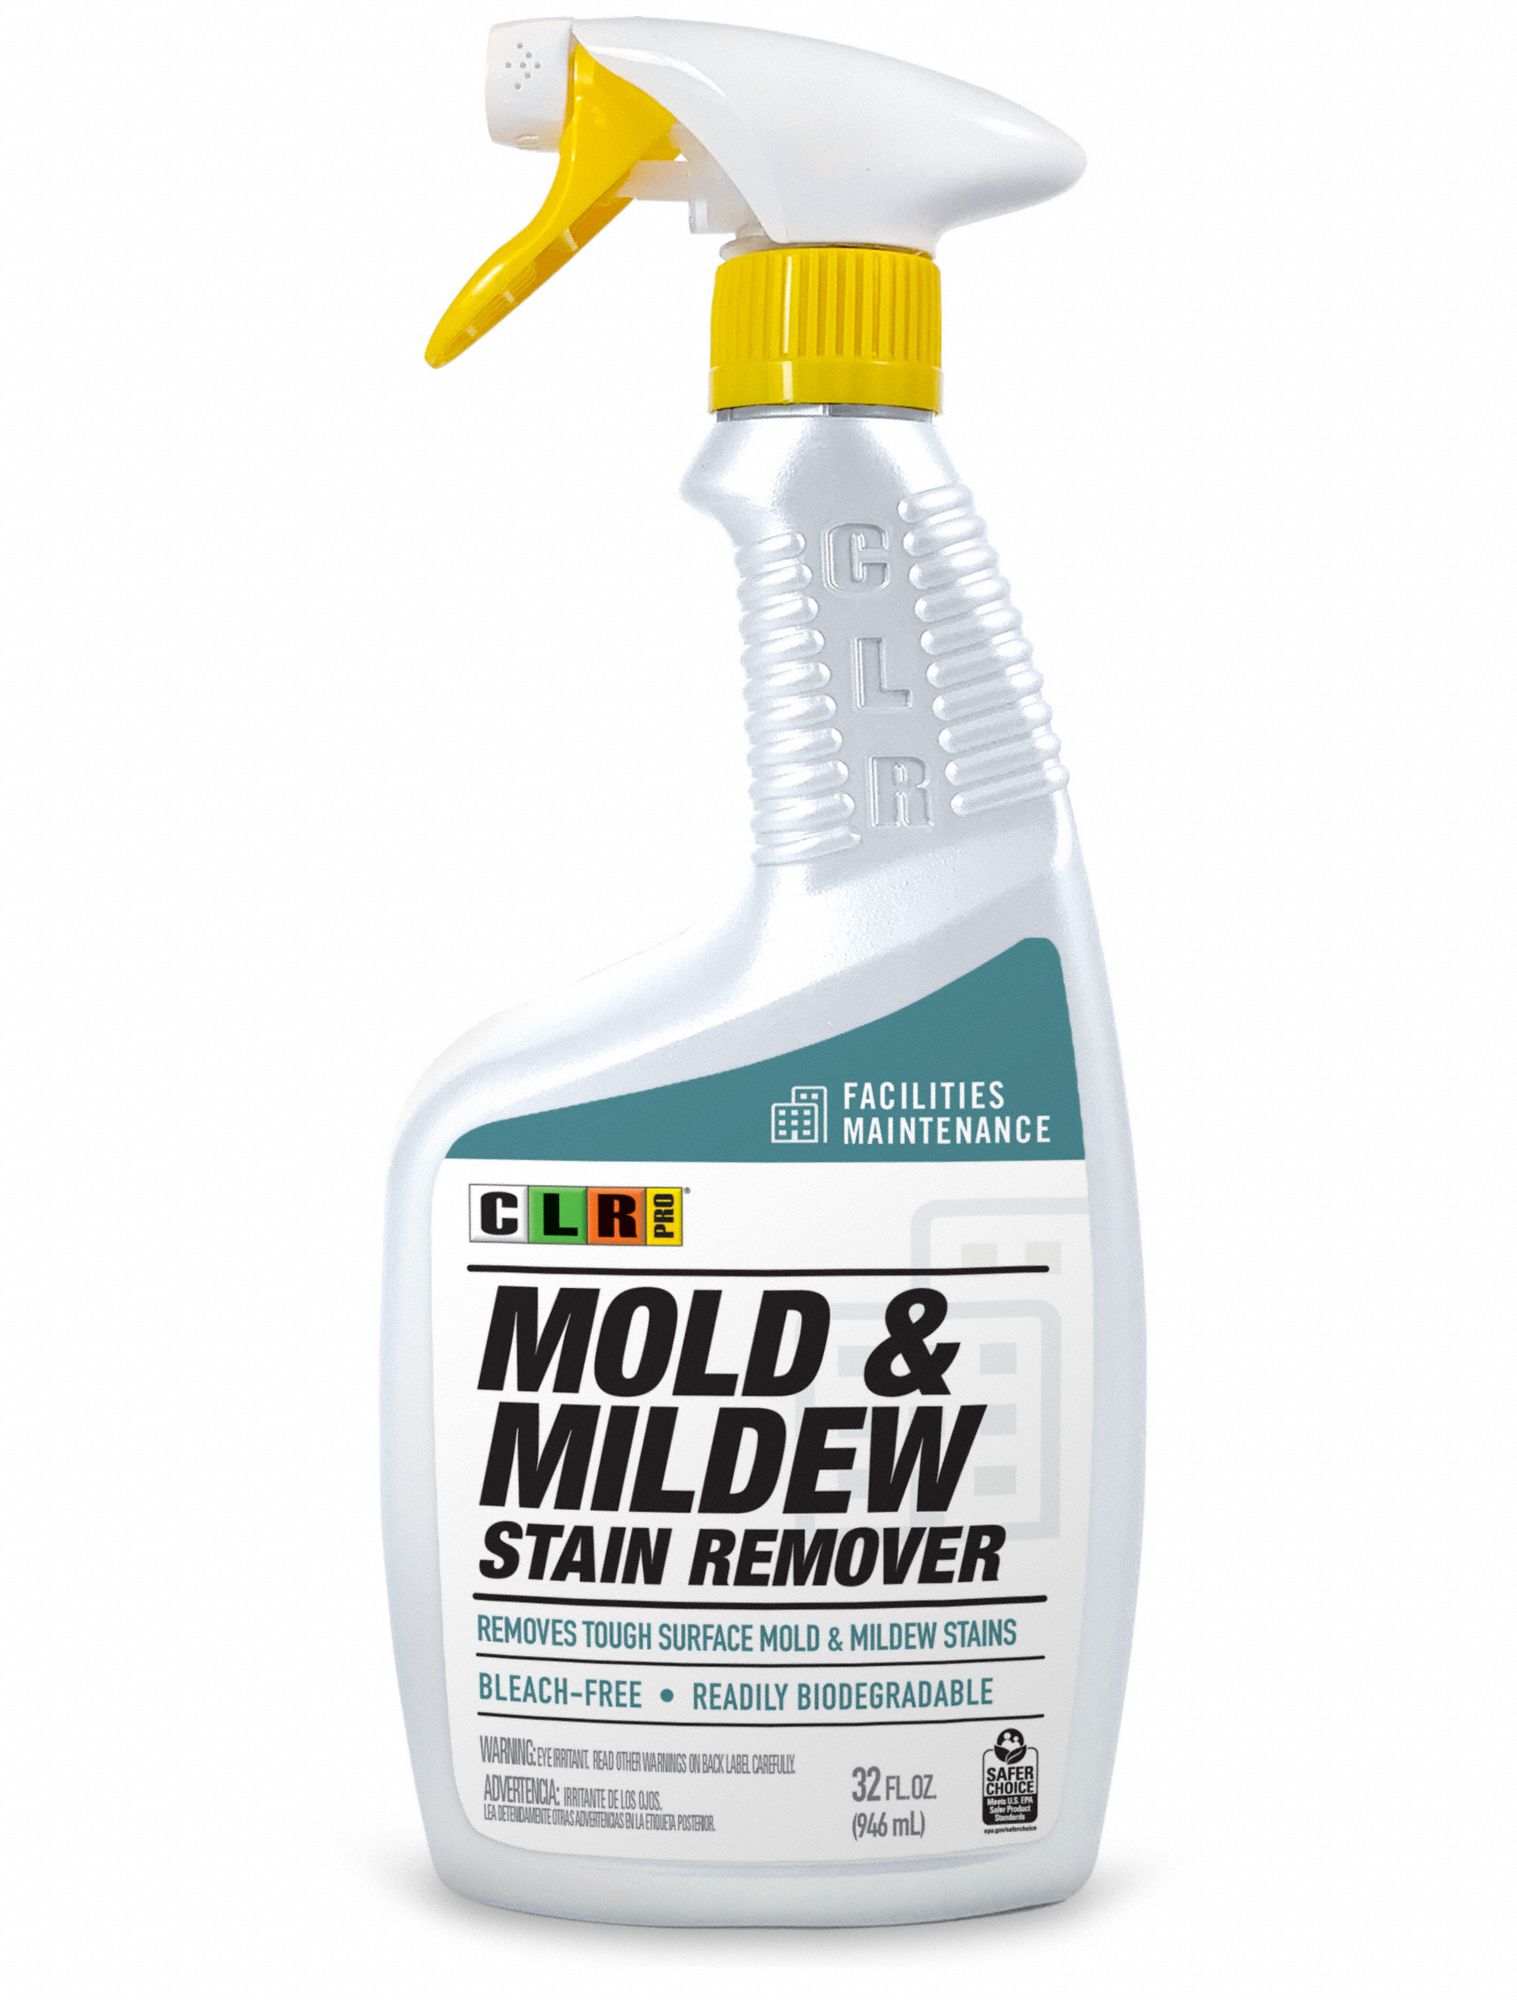 Bleach-Free Mold and Mildew Remover: Trigger Spray Bottle, 32 oz Container Size, Foam